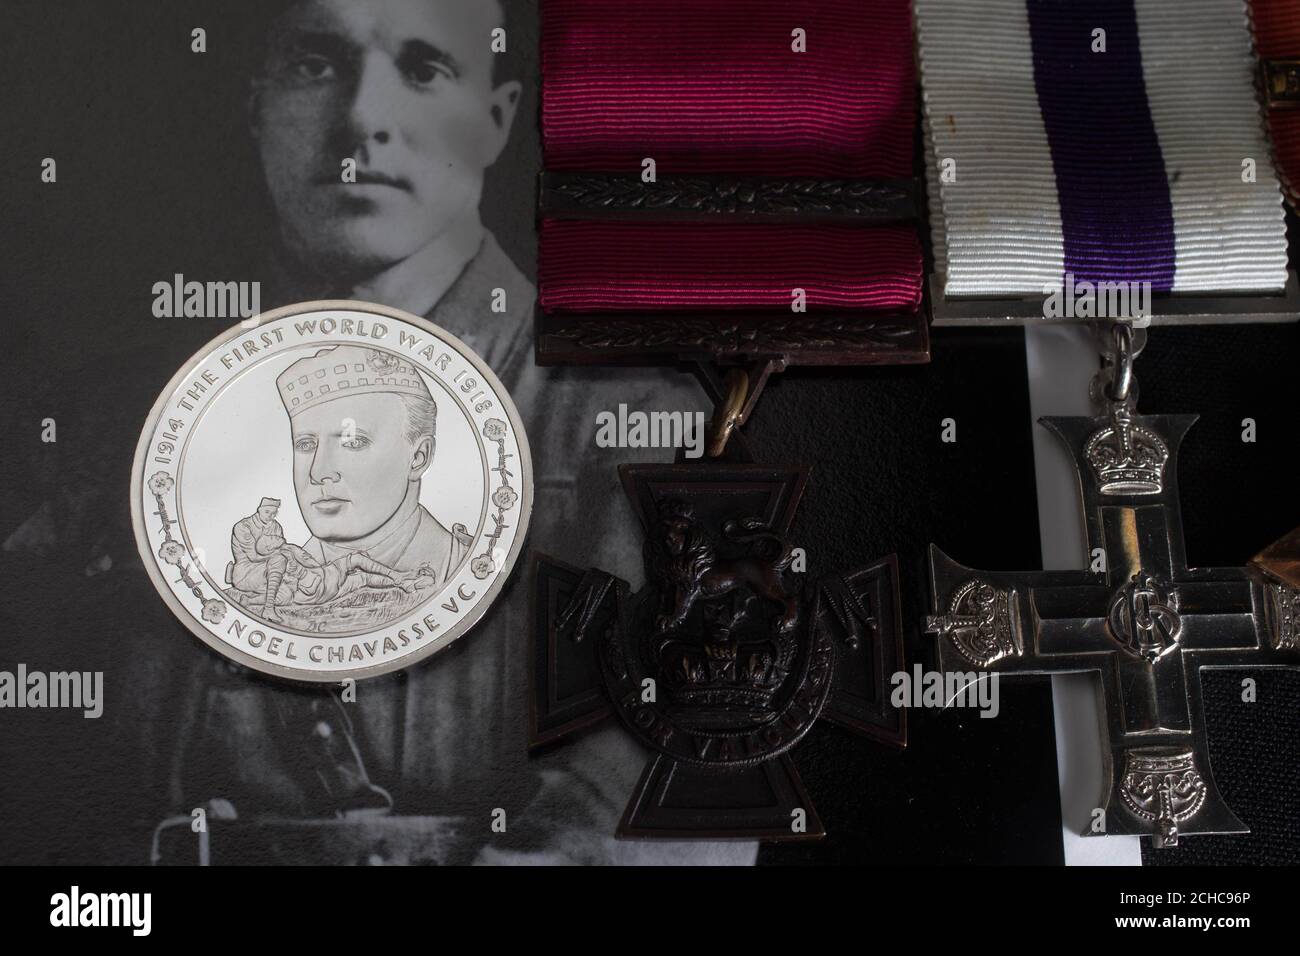 EMBARGOED TO 0001 MONDAY JULY 31 EDITORIAL USE ONLY A commemorative &pound;5 coin, which honours First World War hero Captain Noel Chavasse, unveiled by The Royal Mint at the Imperial War Museum in London, alongside his Victoria Cross that is part of the Lord Ashcroft collection.  Stock Photo